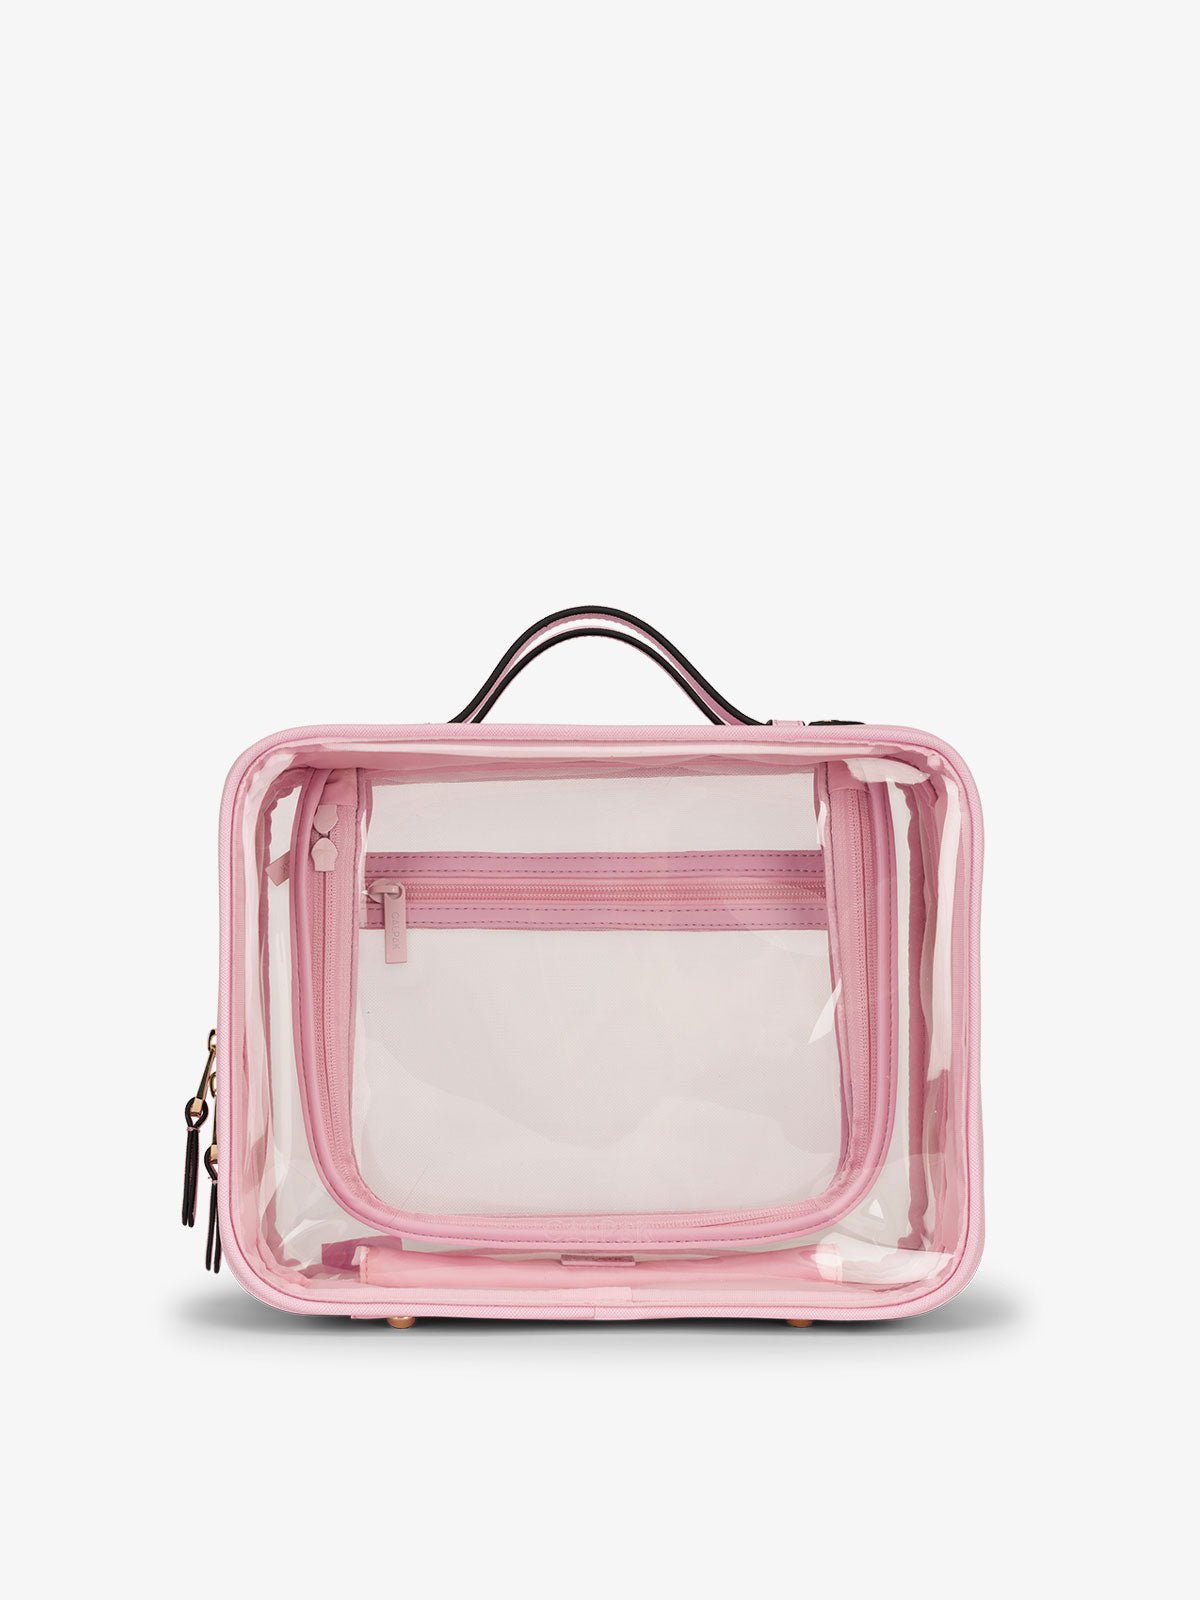 CALPAK Large clear makeup bag with zippered compartments in strawberry